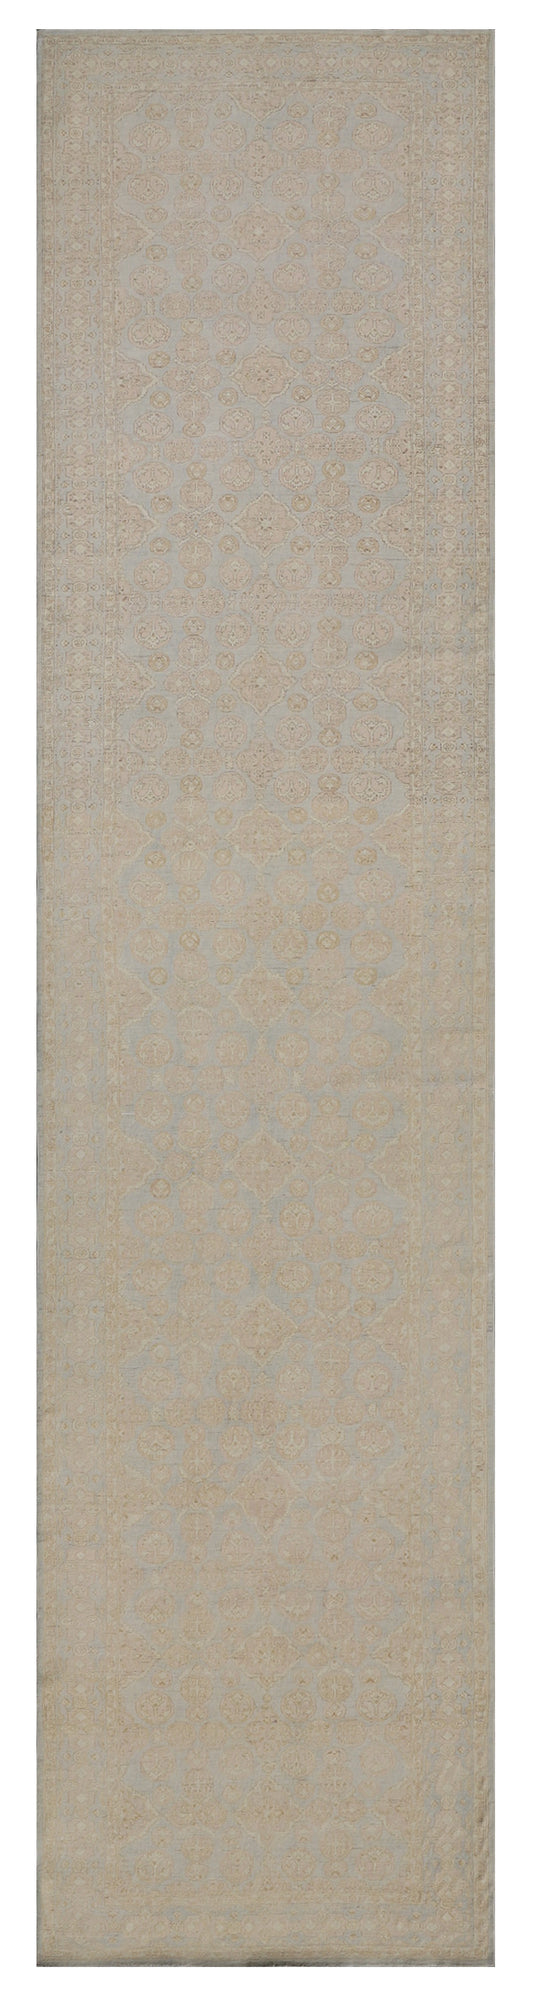 5'x22'Ariana Fine Long and Wide Traditional Floral Design Runner Rug